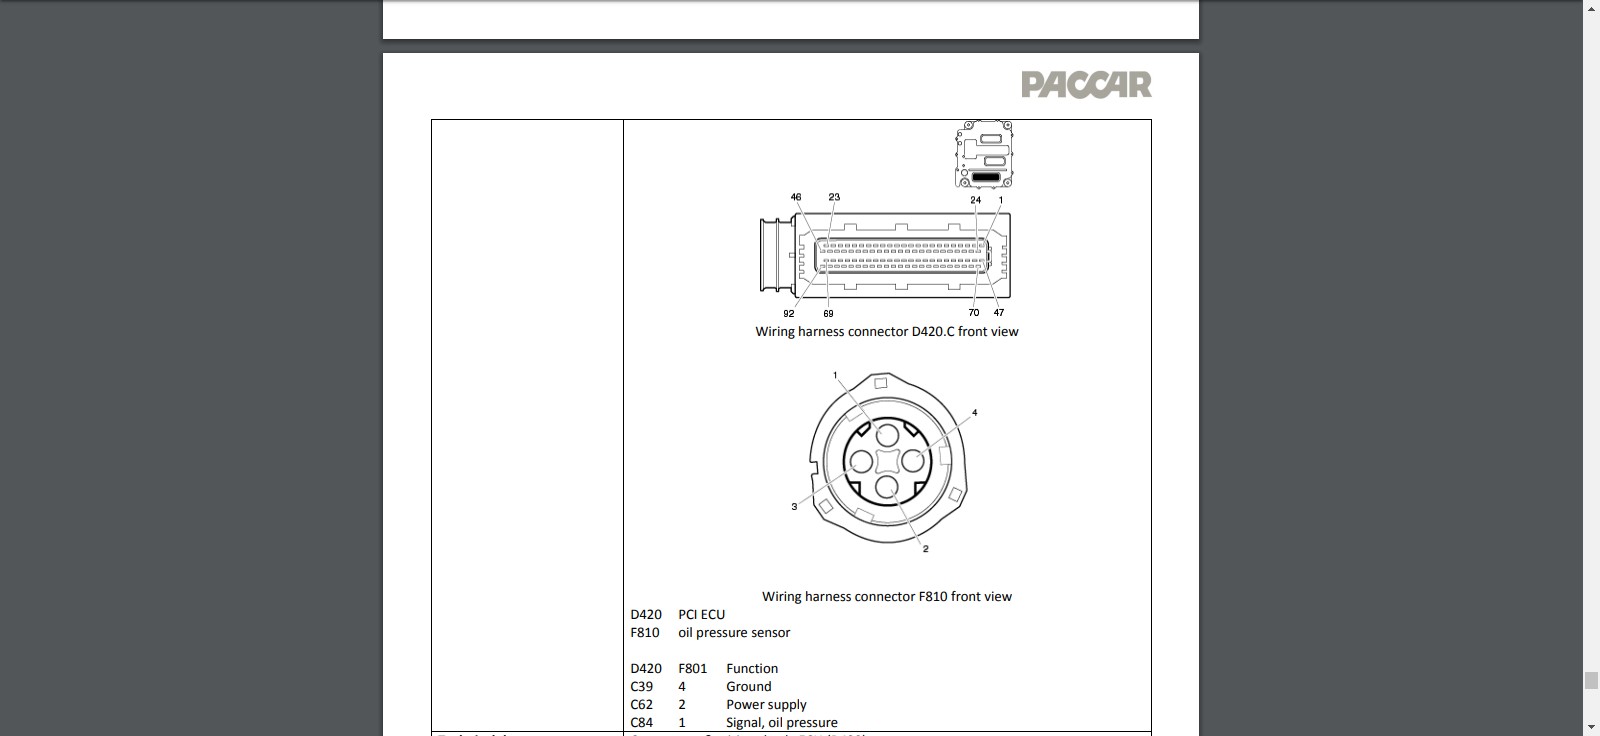 Paccar Mx13 Wiring Schematic Paccar Mx Wiring Diagram Wiring Diagram Of Paccar Mx13 Wiring Schematic